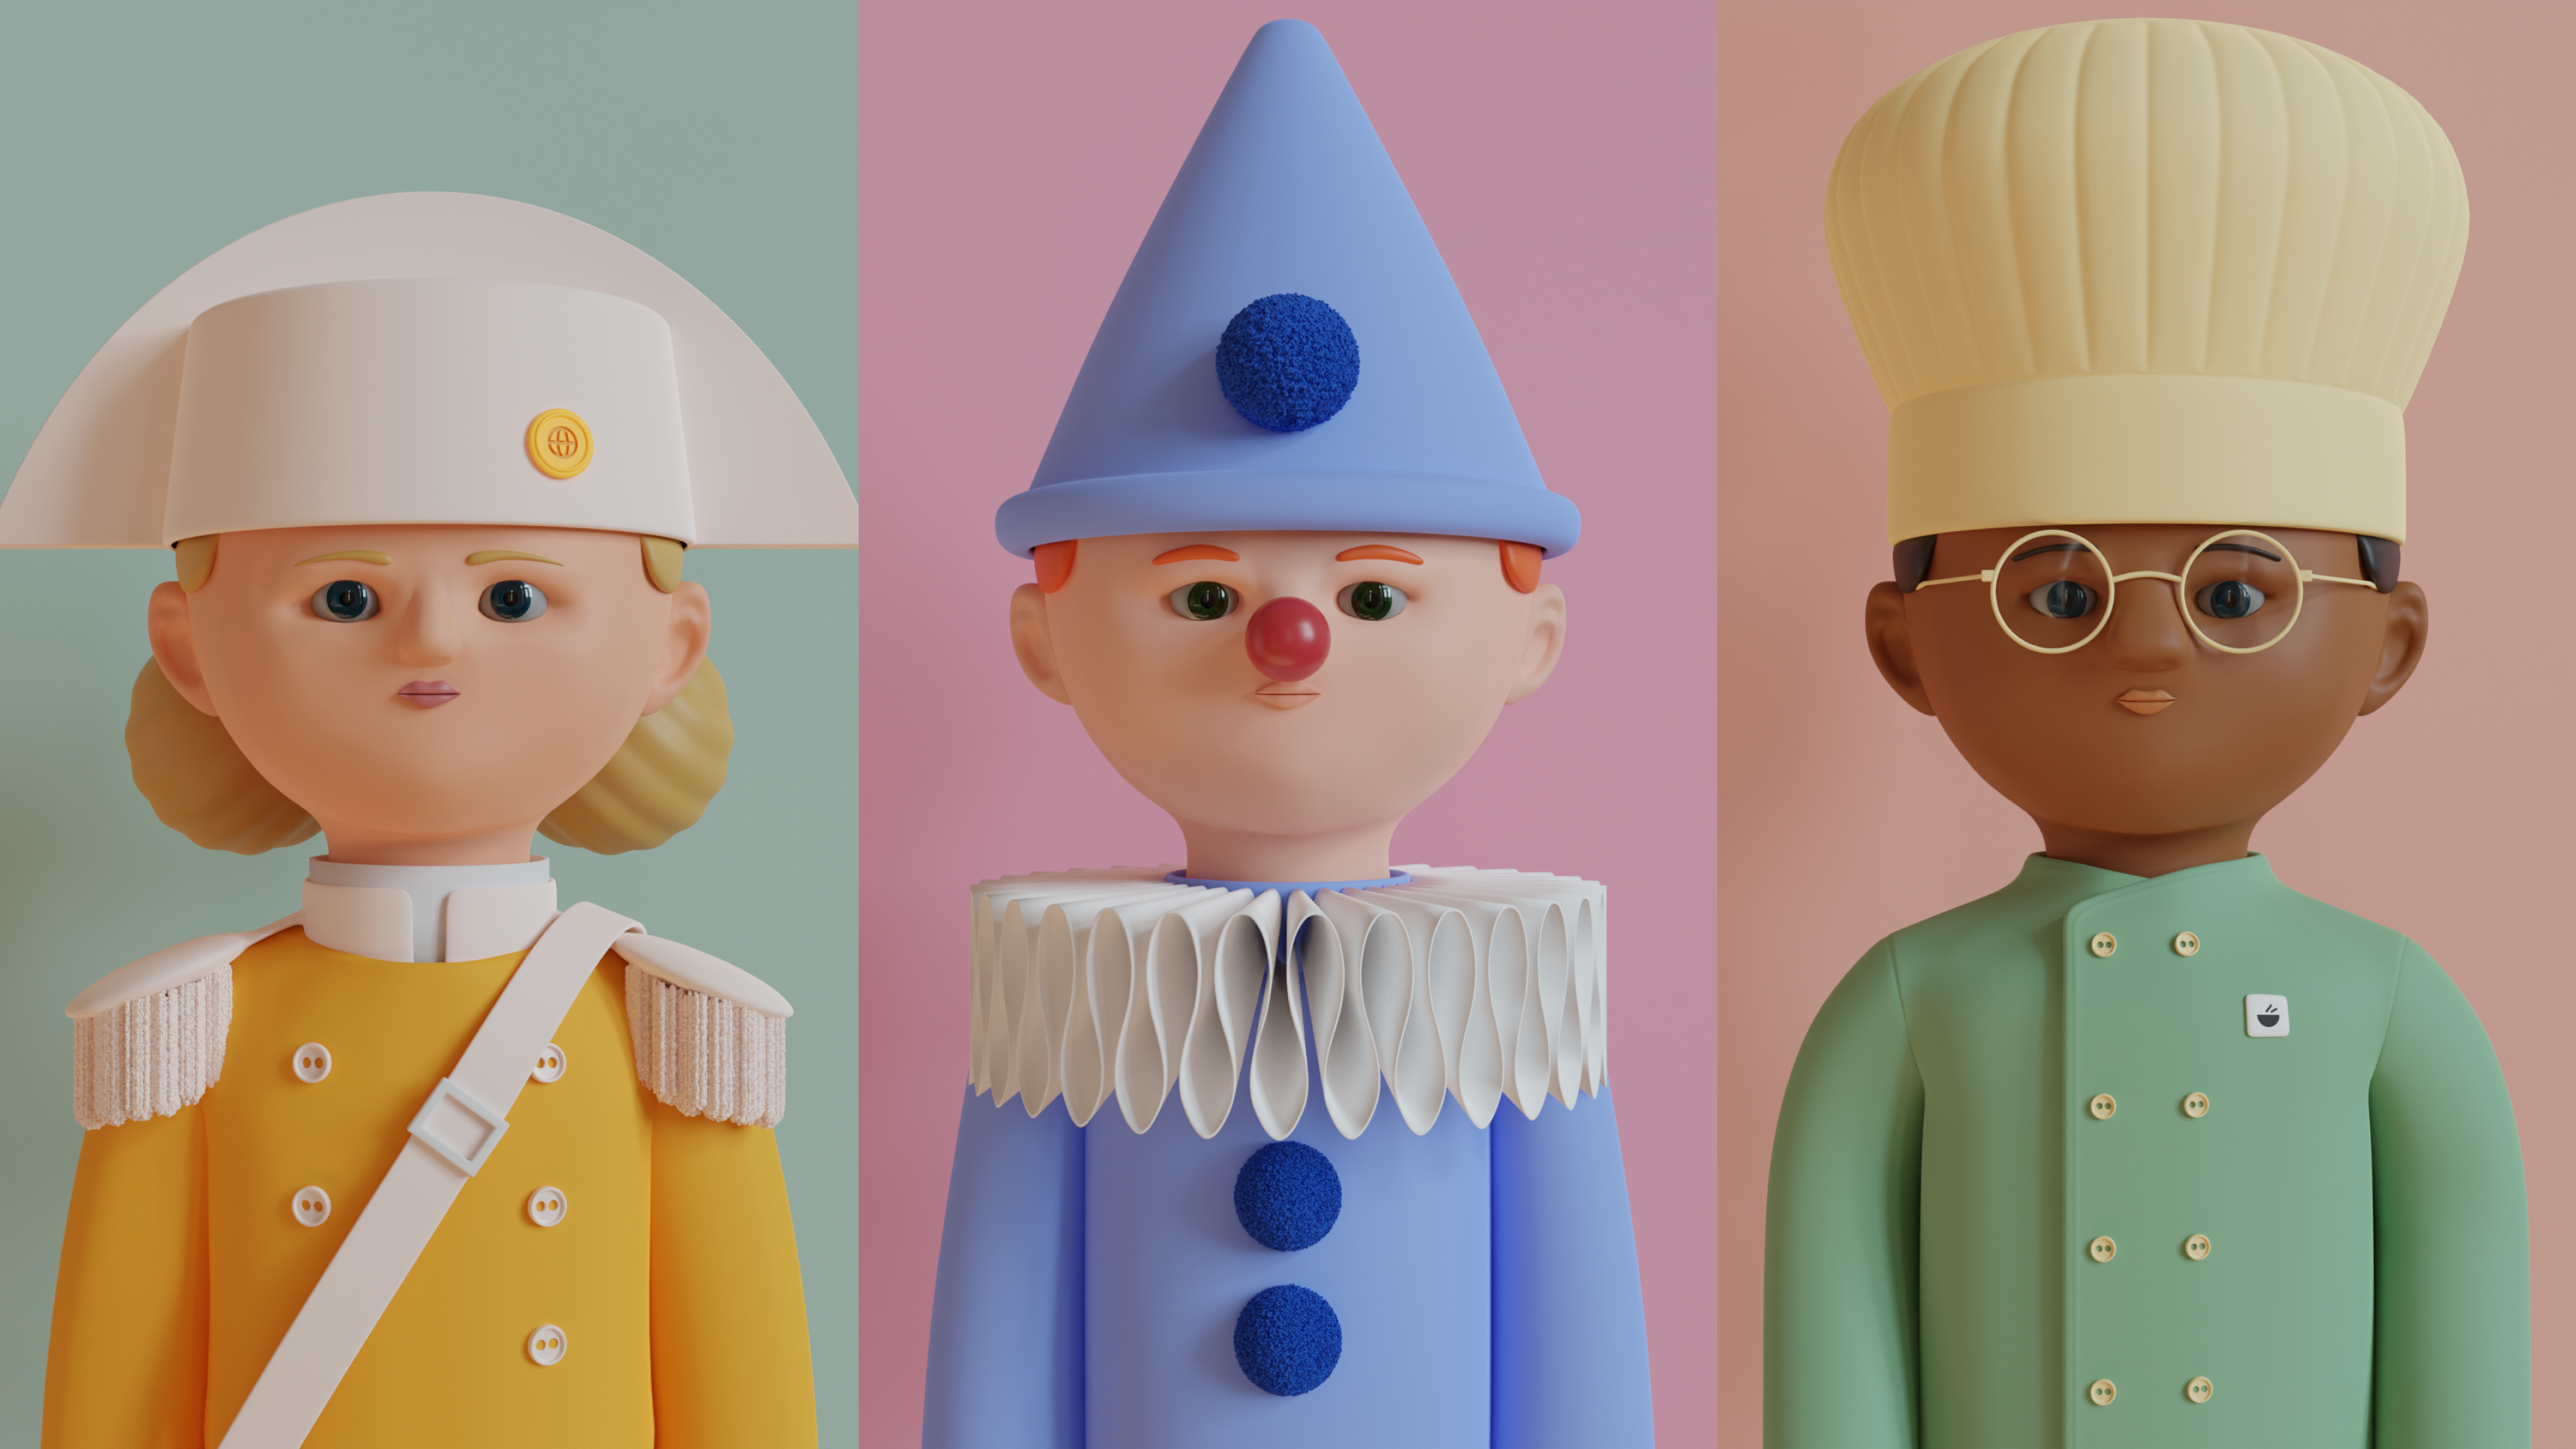 TinyFacesNFT characters created in Blender - 3 characters with different traits such as clothing and skin color.